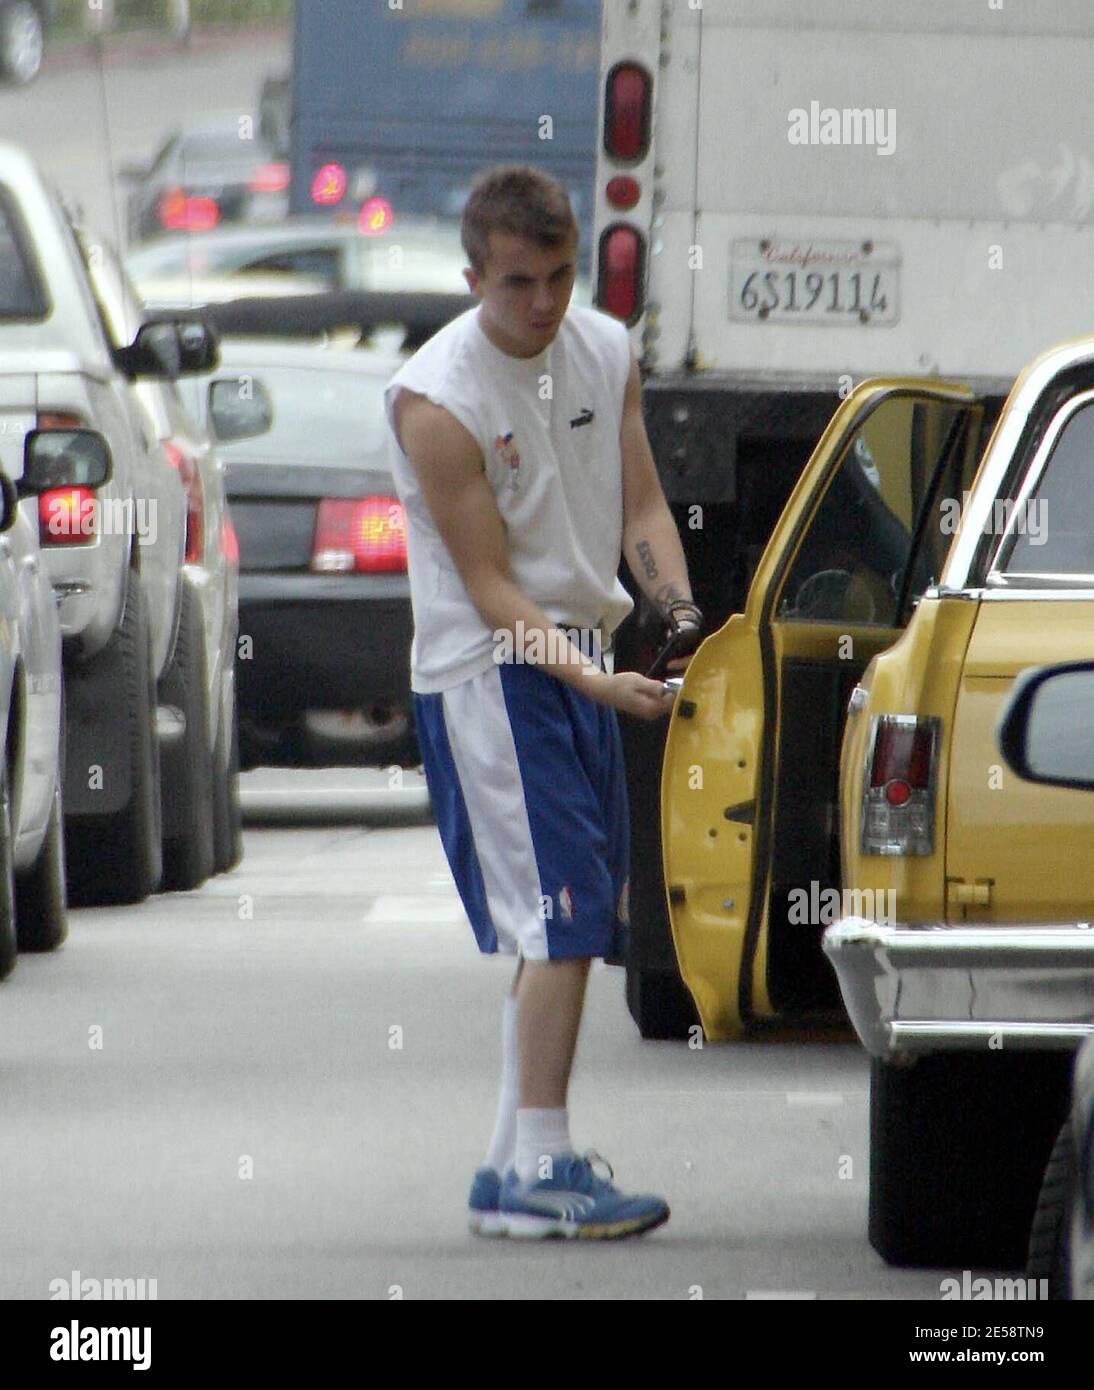 Exclusive!! Frankie Muniz is a zero! Muniz wore a personalized t-shirt while jogging to the gym. West Hollywood, Calif. 10/27/07.   [[rac ral]] Stock Photo